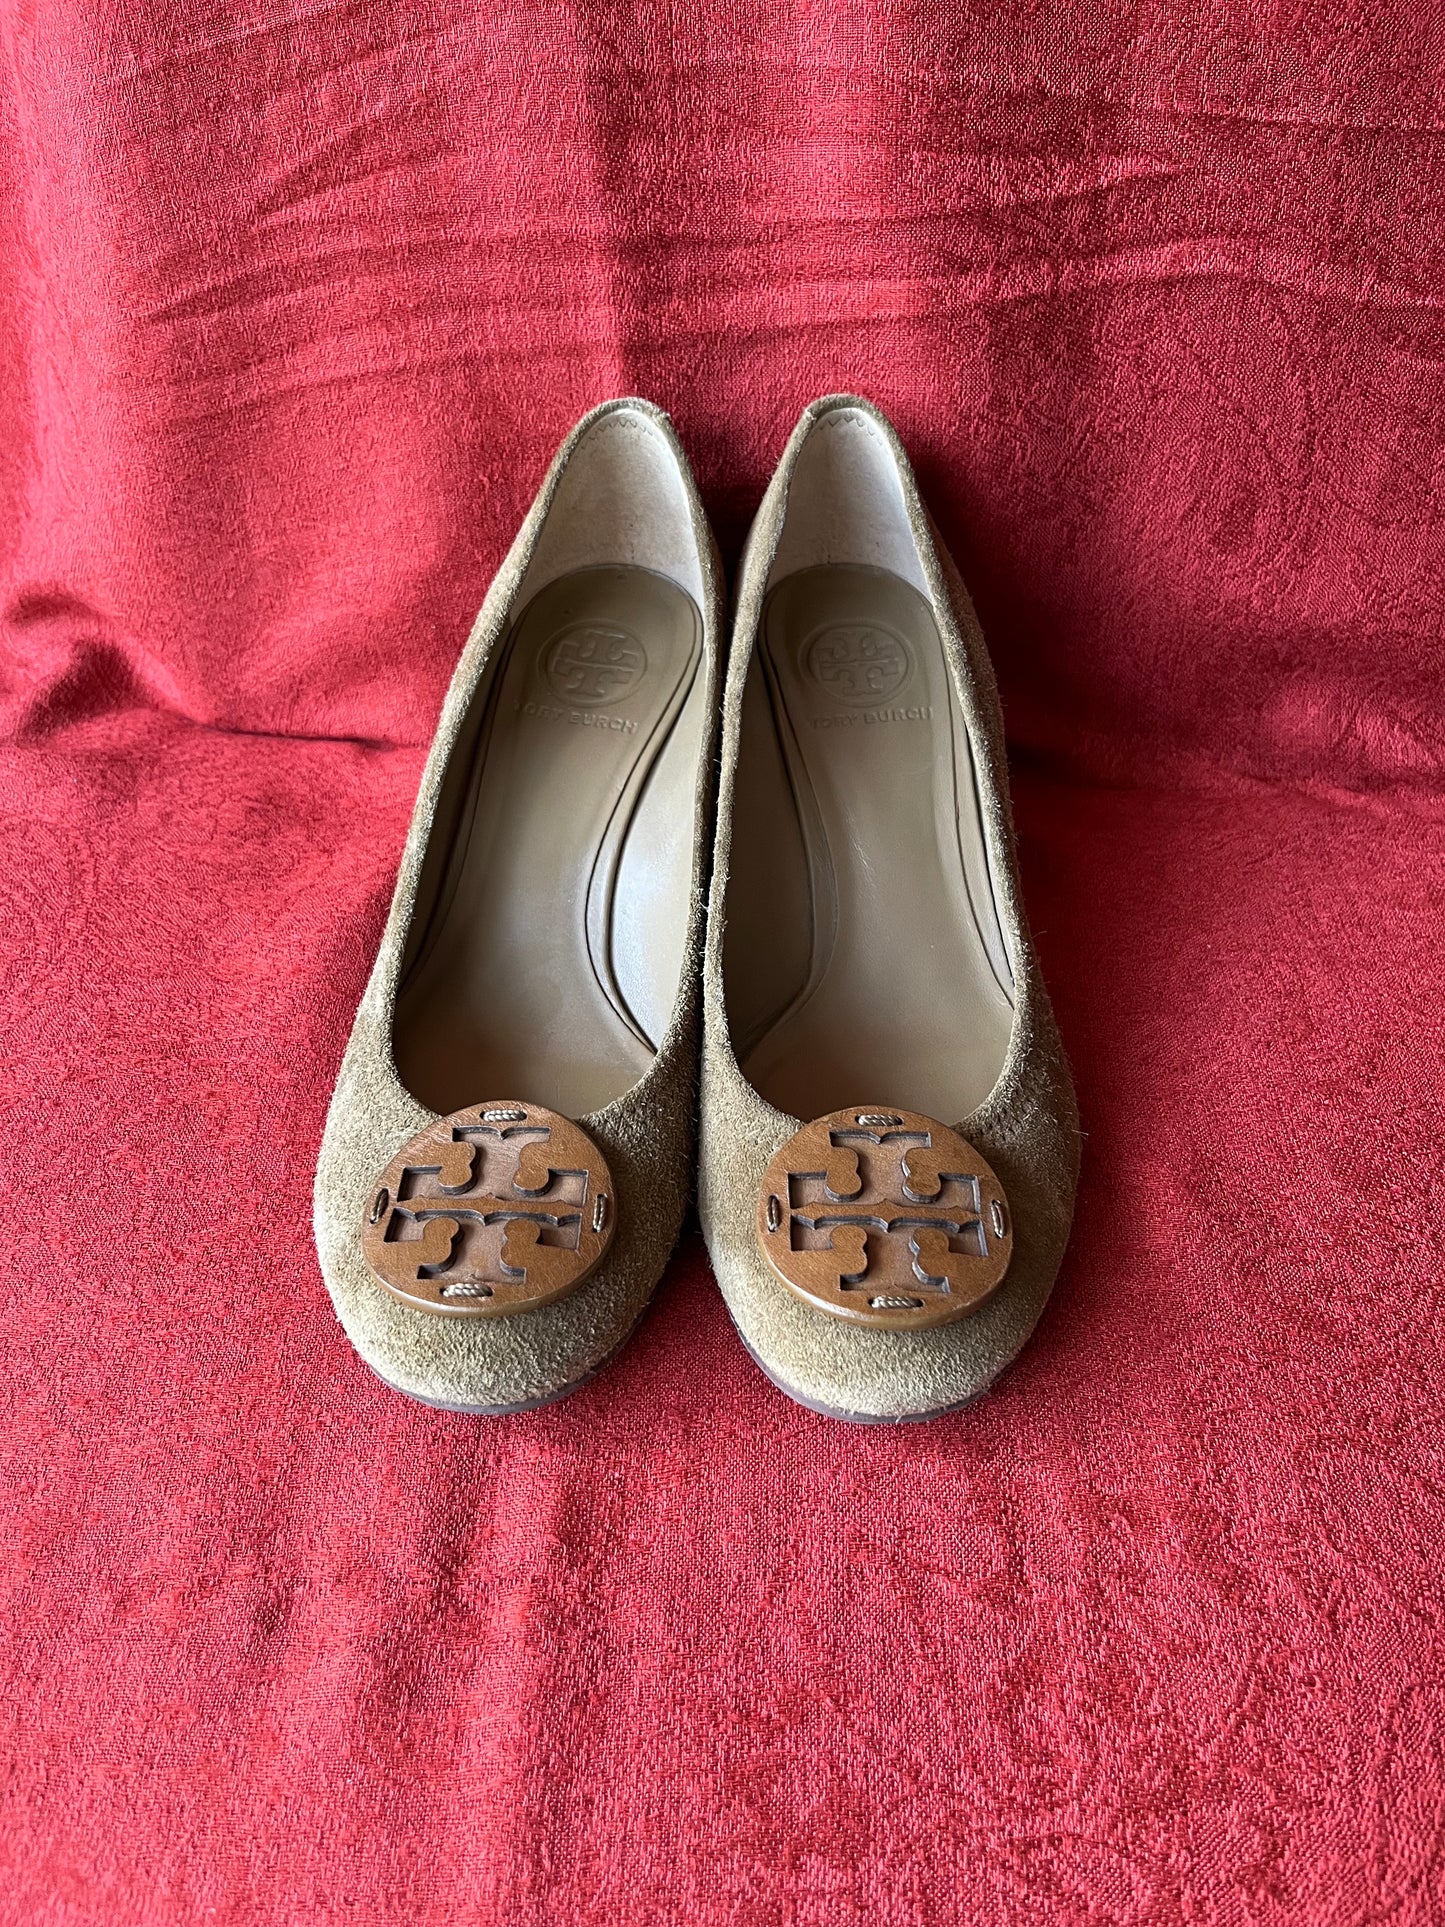 Tory Burch Suede Wedge Heel with Wooden Logo-Size 8M